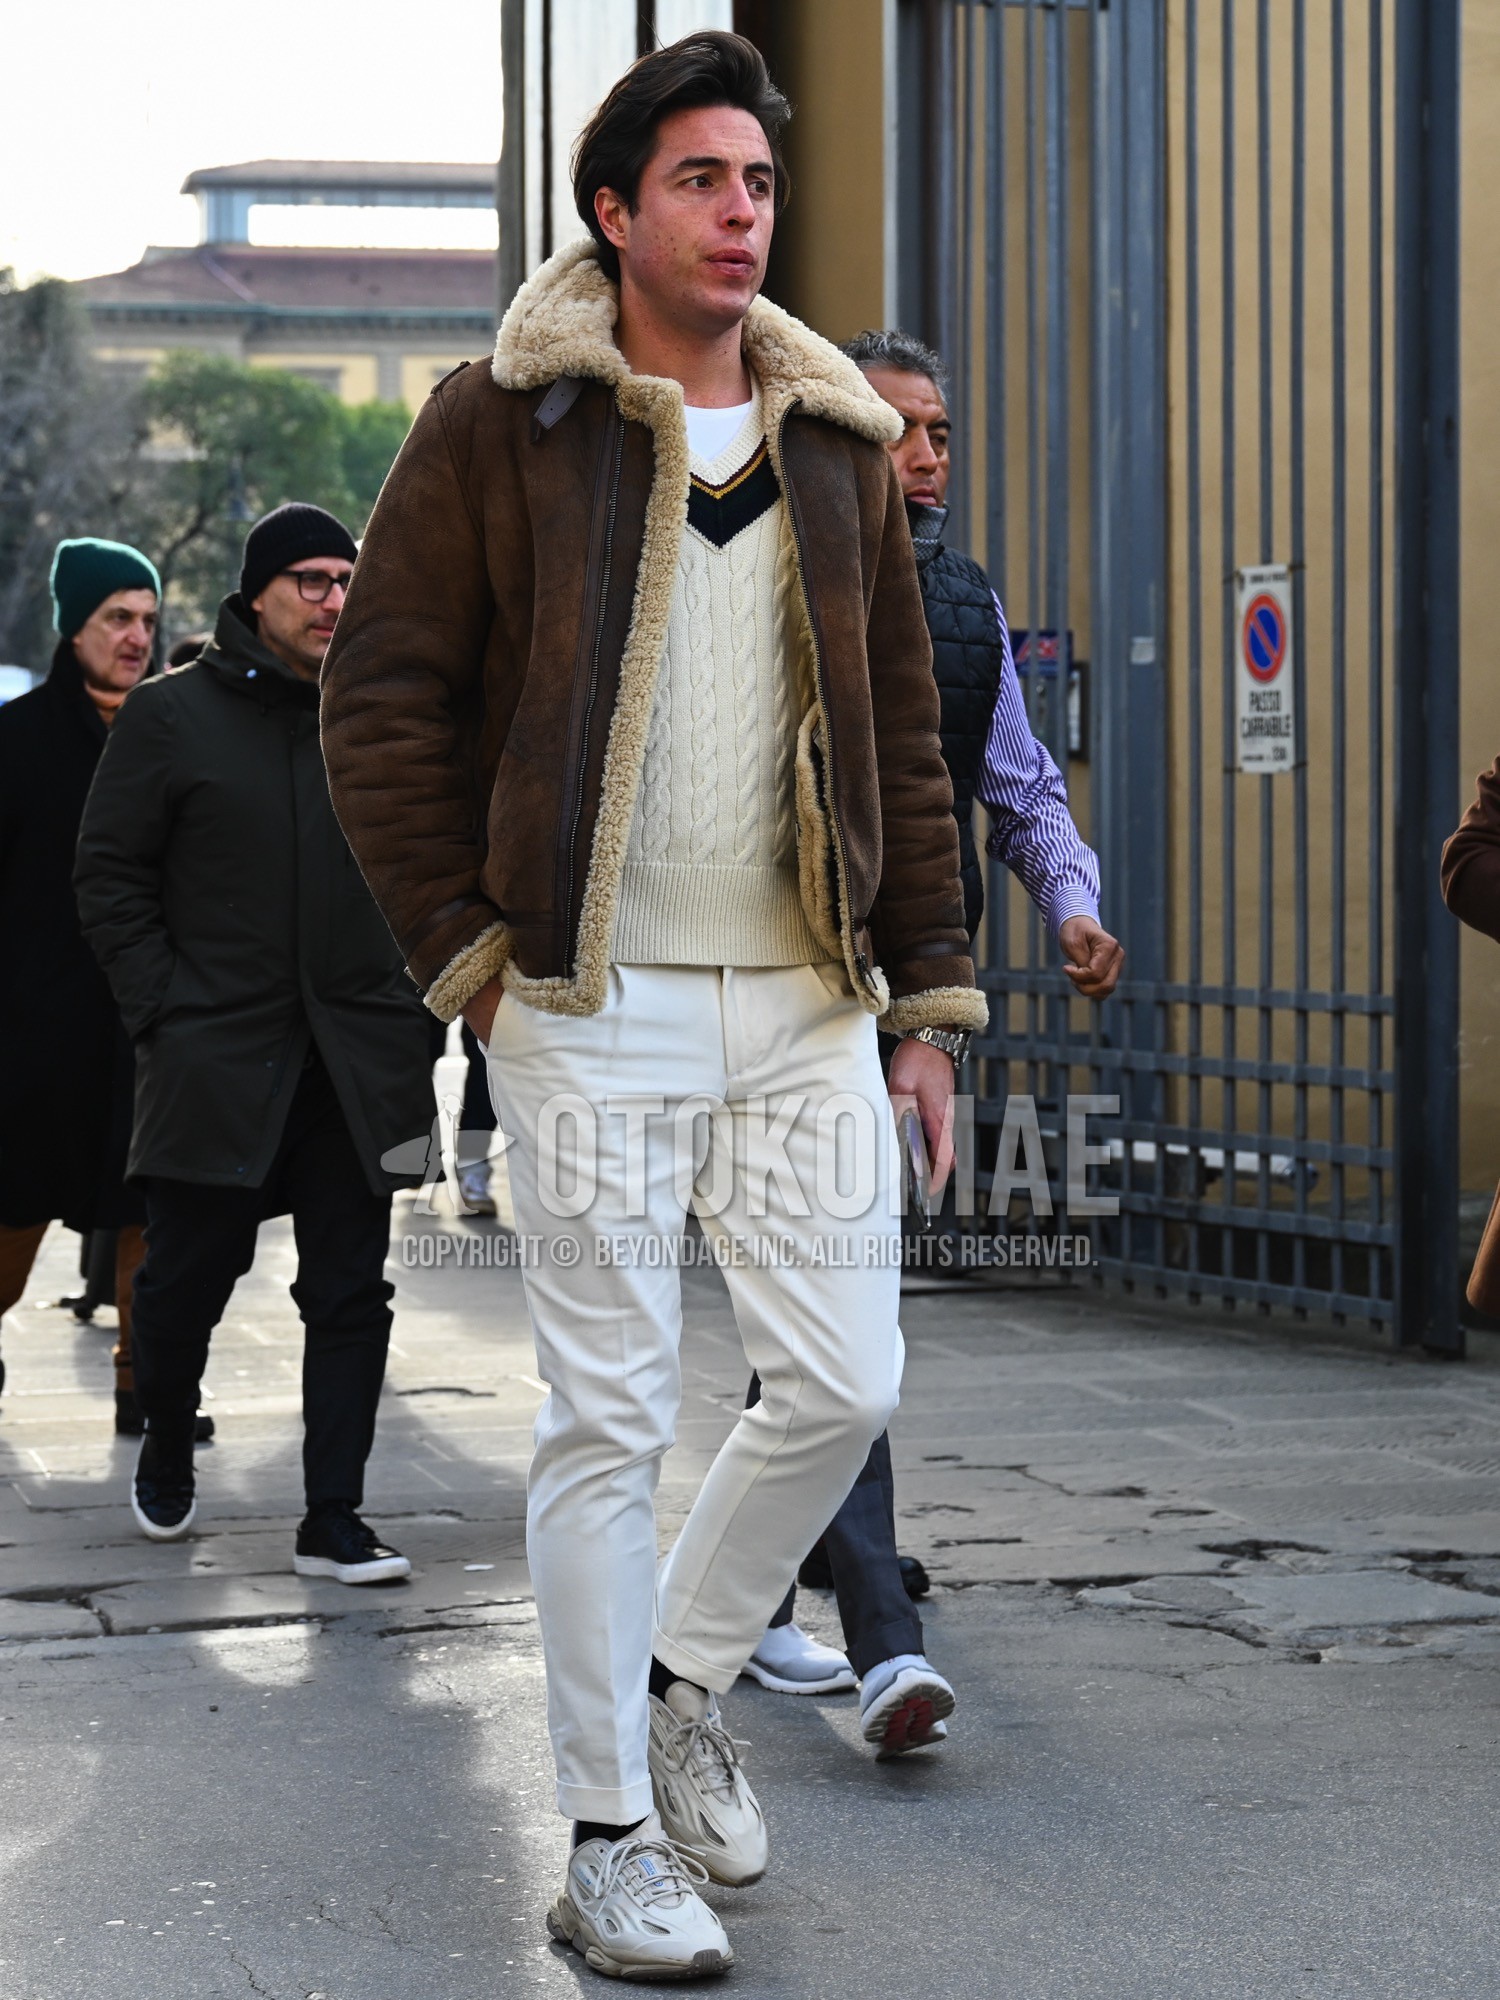 Men's autumn winter outfit with brown plain leather jacket, white plain sweater, white plain t-shirt, white plain slacks, black plain socks, white low-cut sneakers.